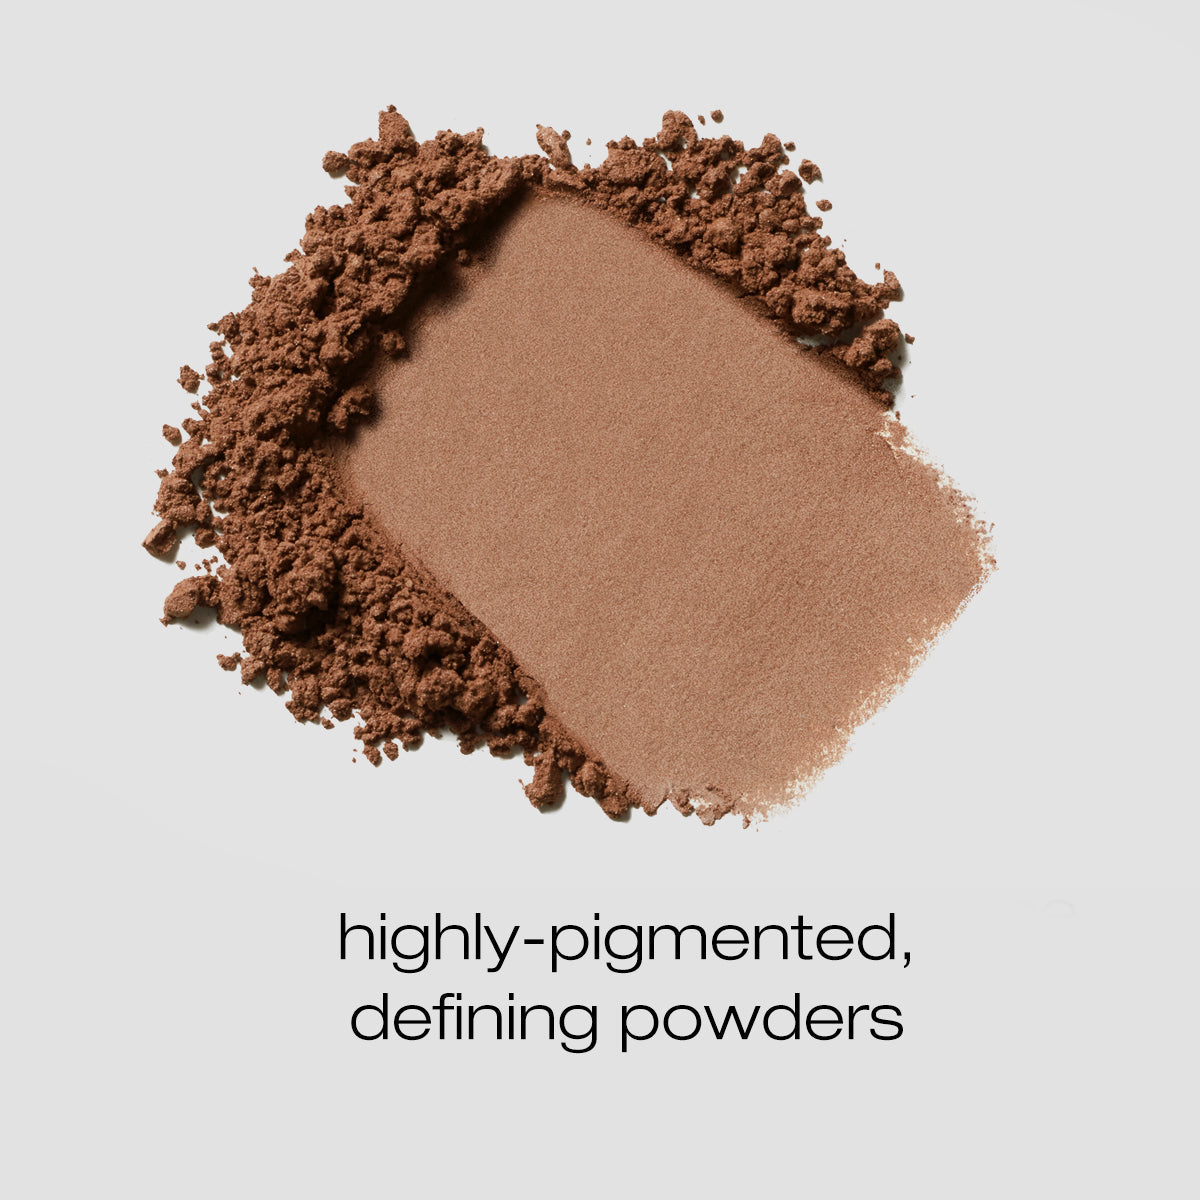 Spread of the cinnamon powder and described as highly pigmented and defining